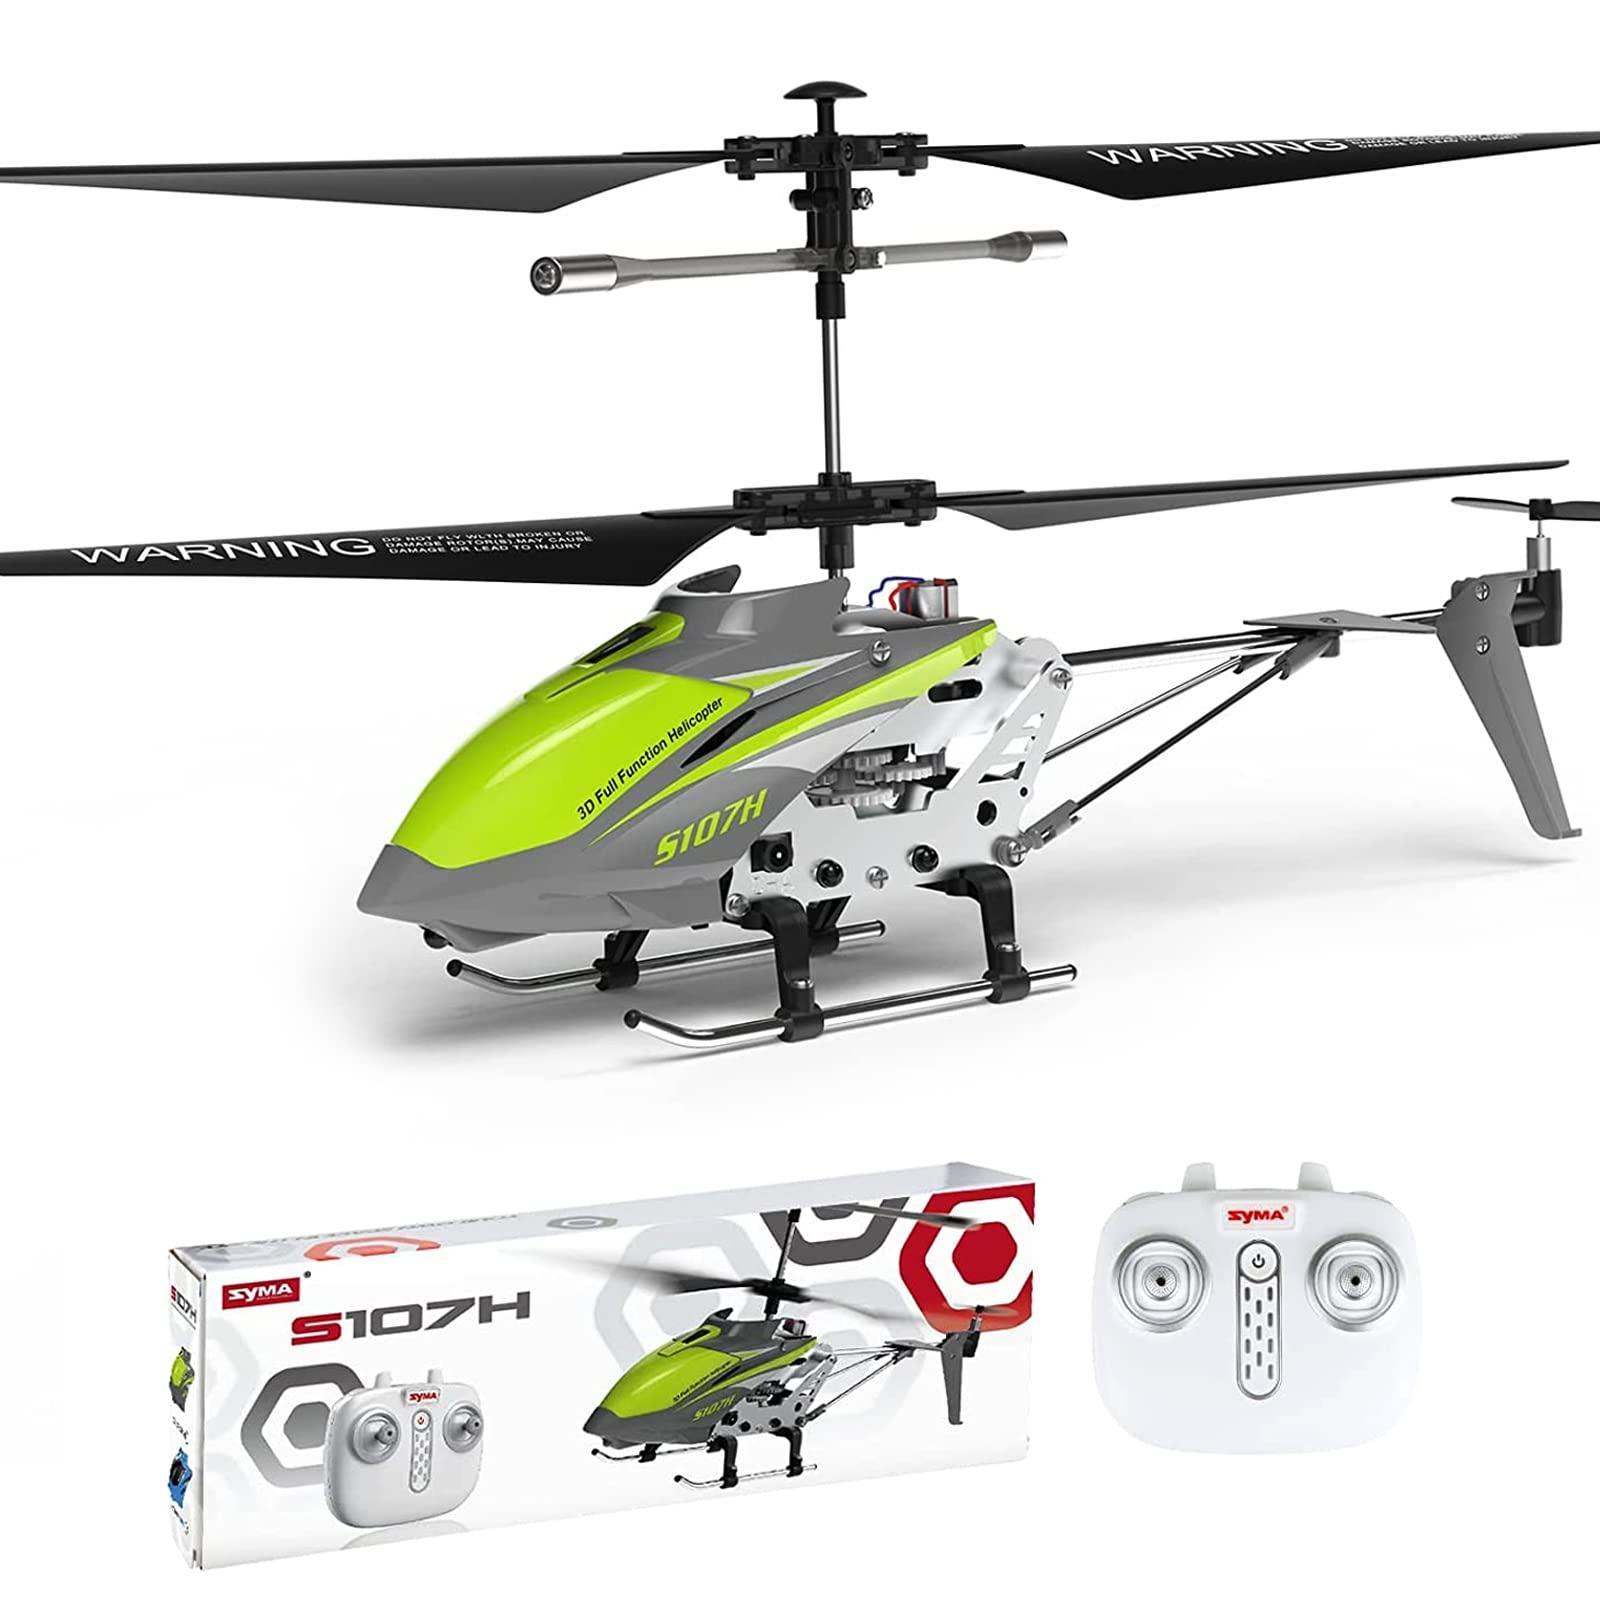 Rc Helicopter Fun Com:  Enhance Your RC Helicopter Skills with RC Helicopter Fun Com!